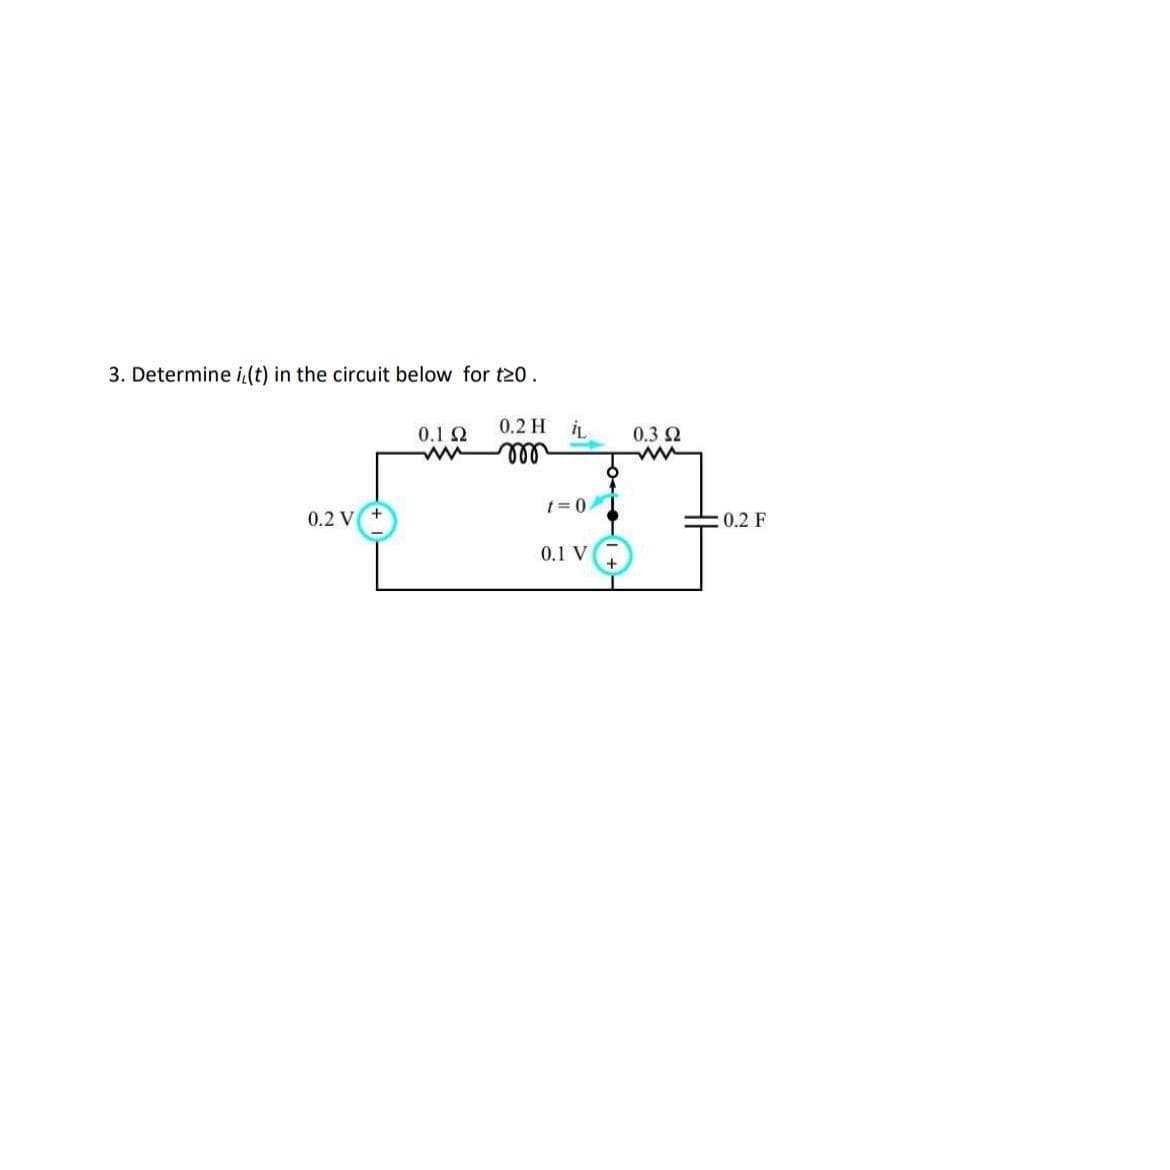 3. Determine i(t) in the circuit below for t20.
0.2 V
0.1 Ω
mn
0.2 H
m
iL
t=0/
0.1 V
0.3 Ω
www
0.2 F